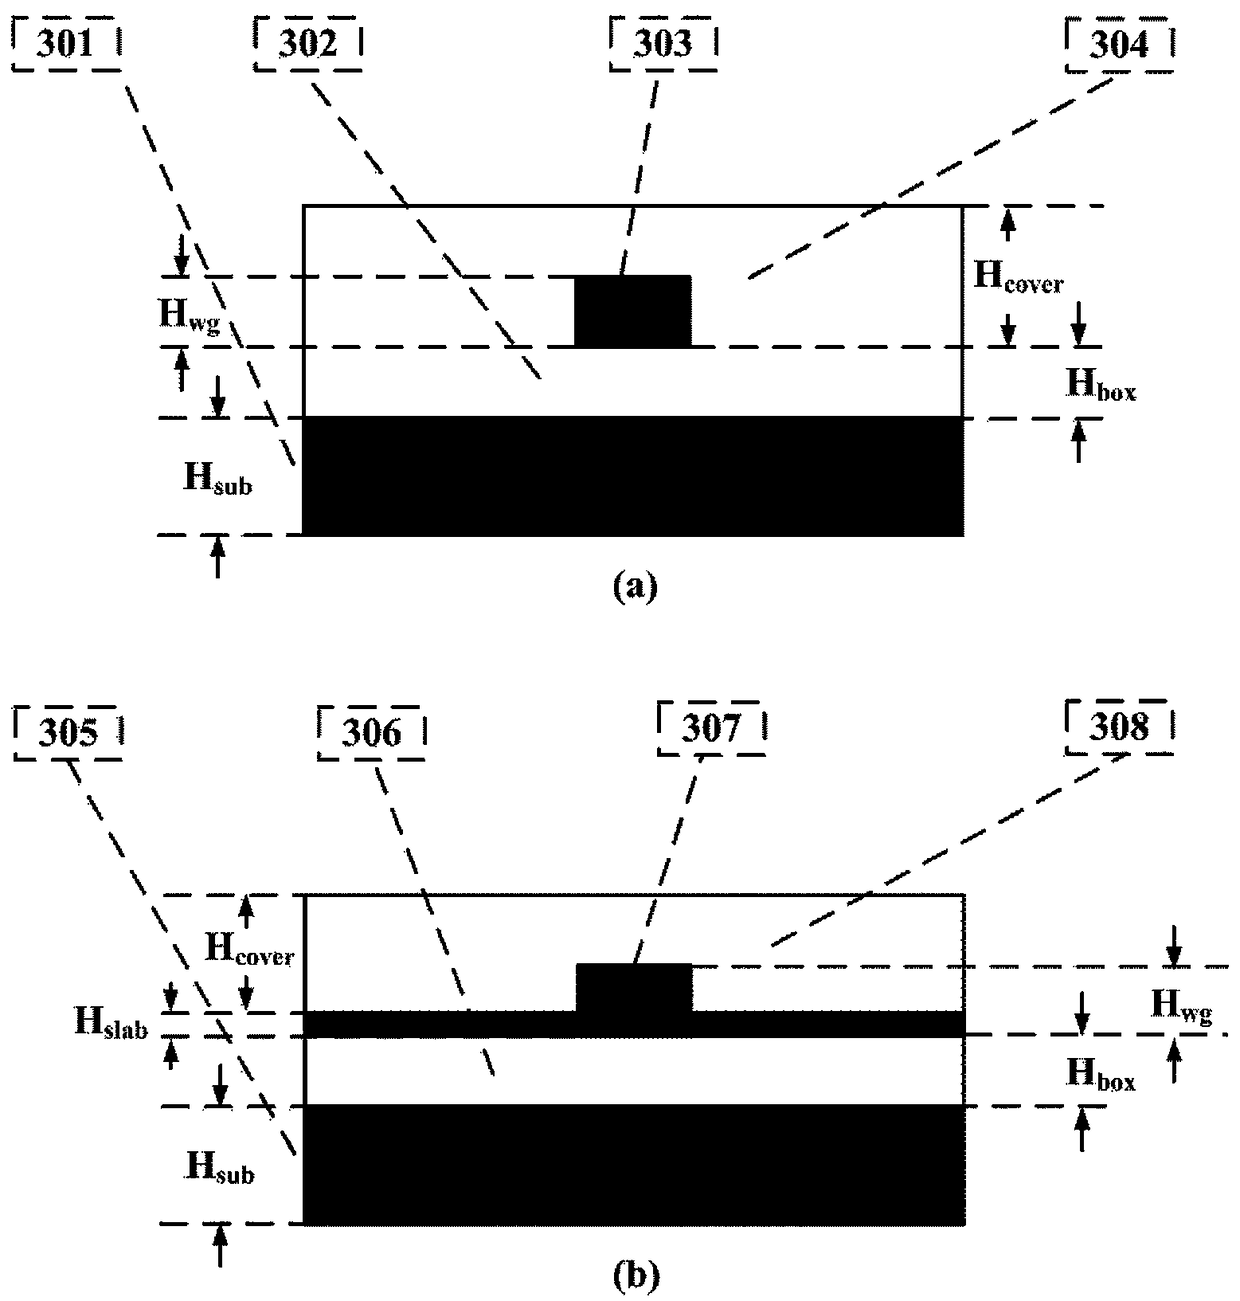 Integrated electro-optic modulator structure for coherent optical communication